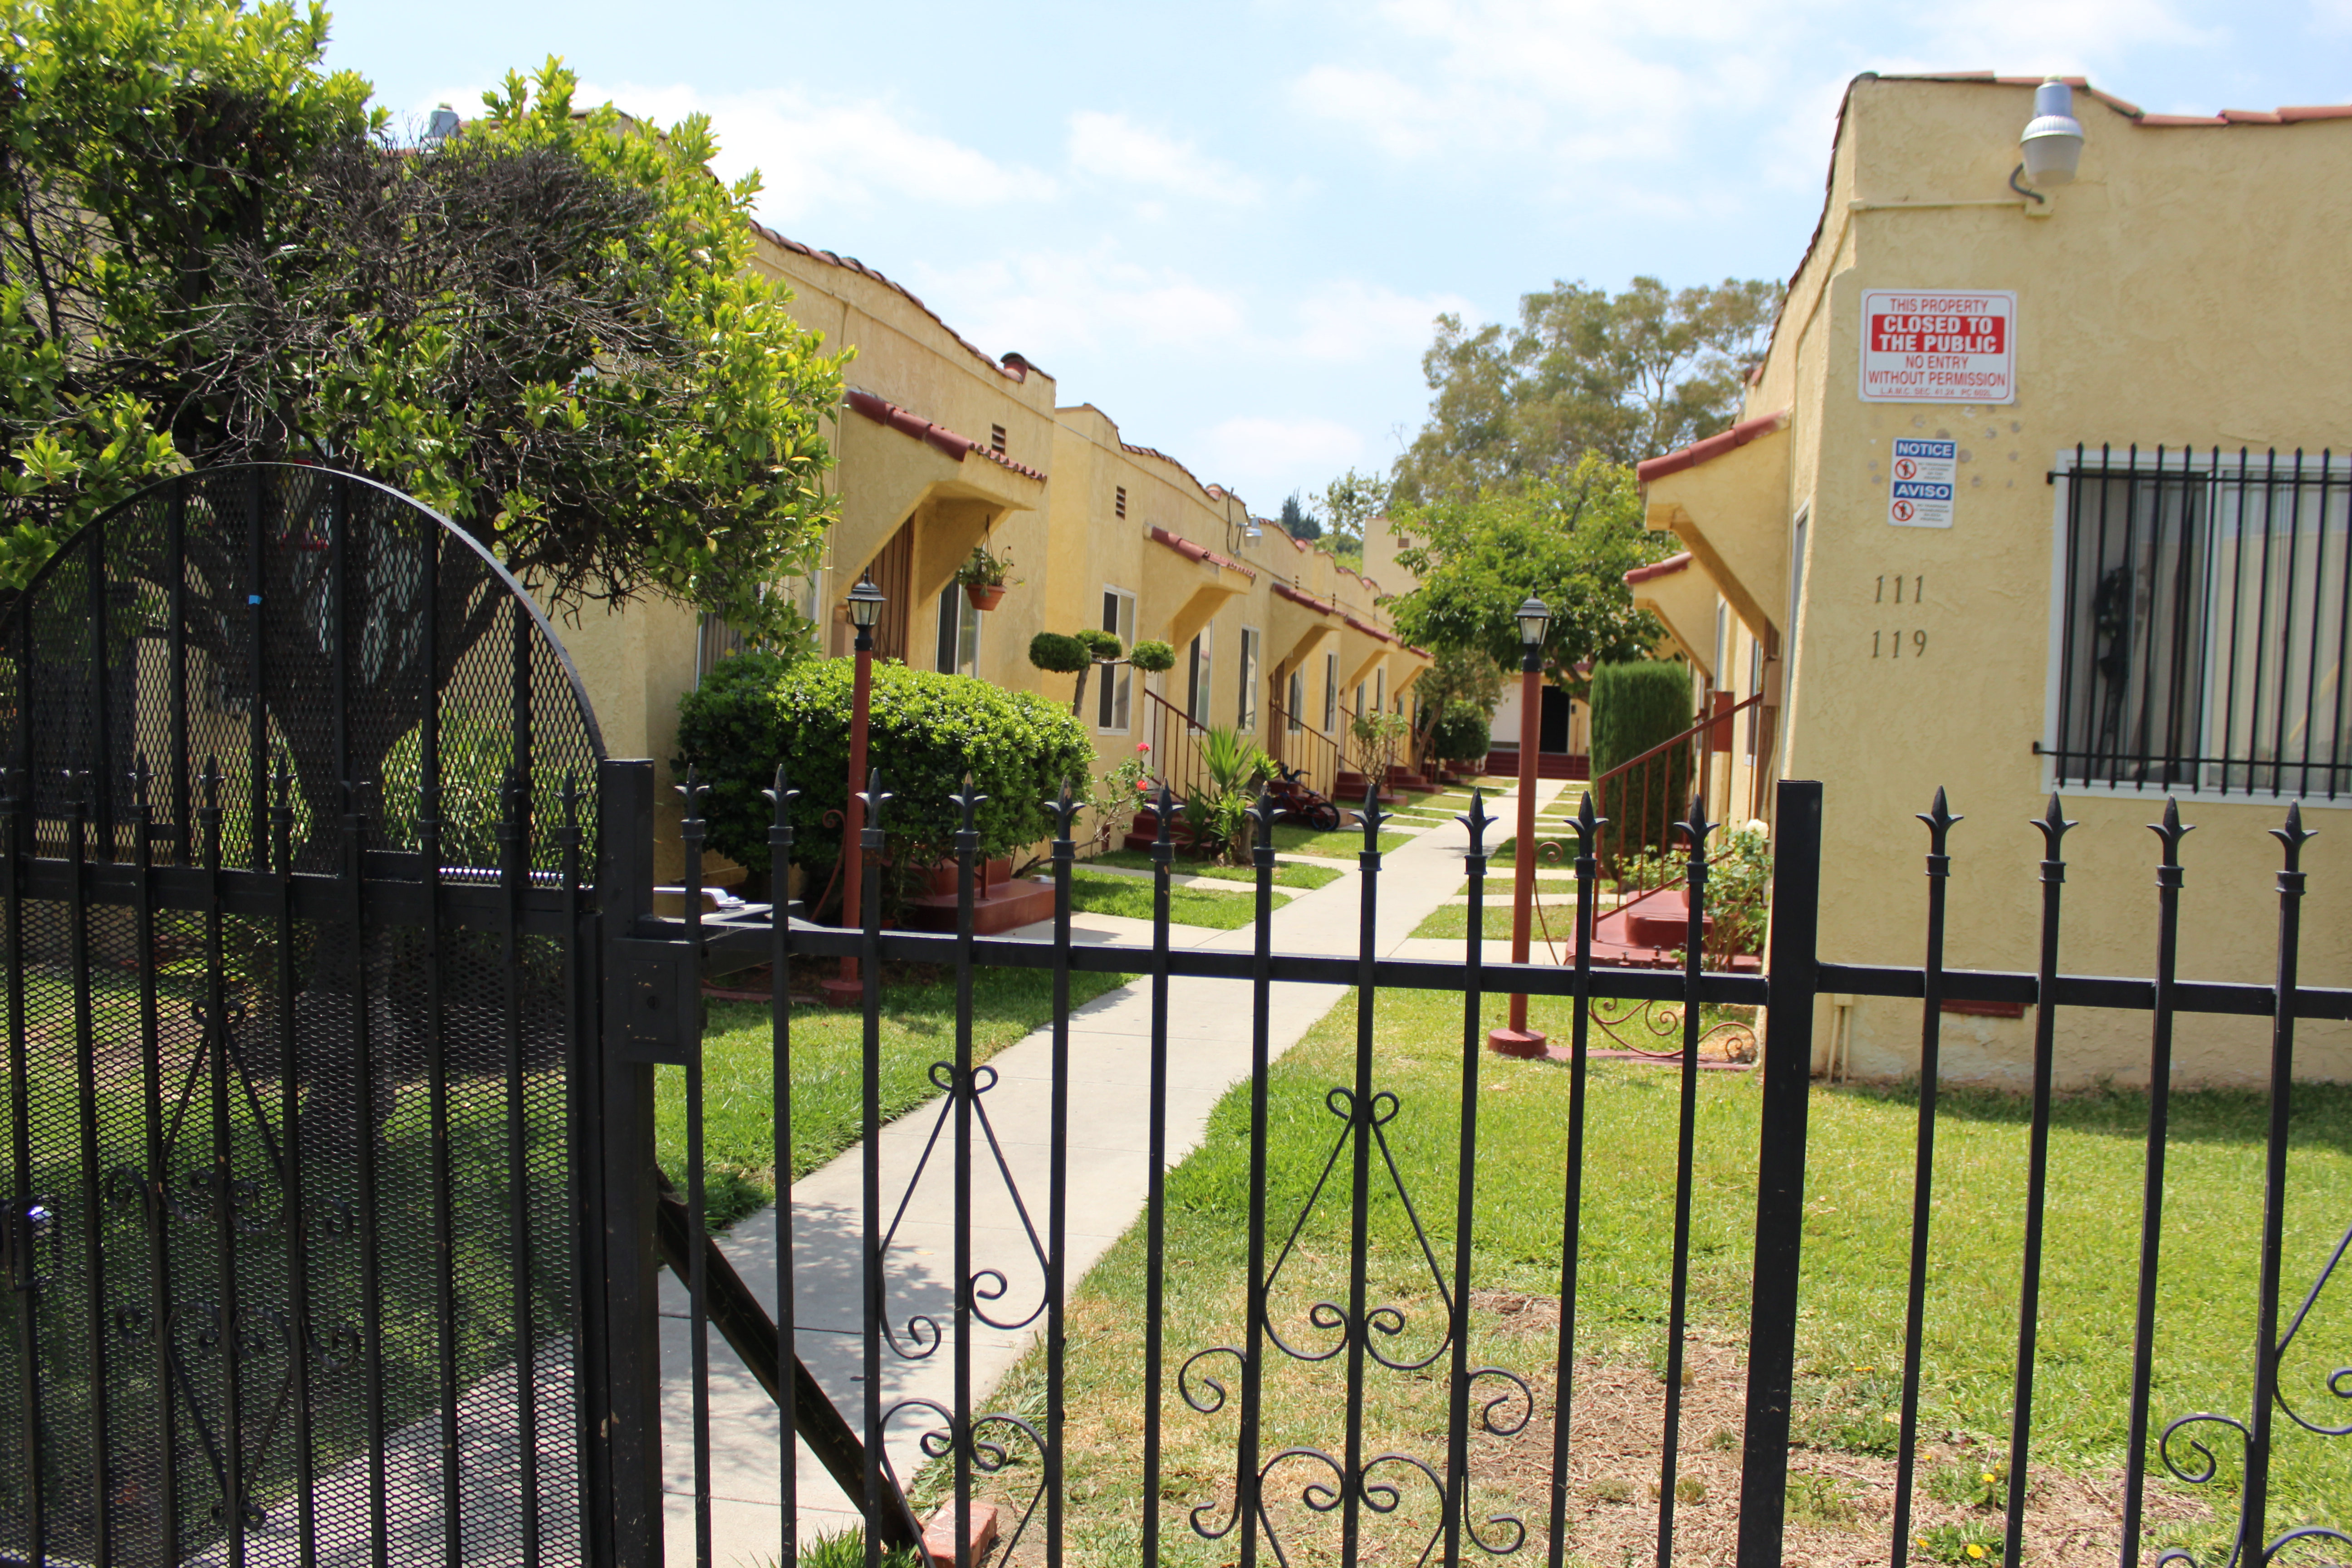 Street view of front entrance to the courtyard style units with a wrought iron gate.  Each unit has a three step exit with handrails, grass sections by each unit.